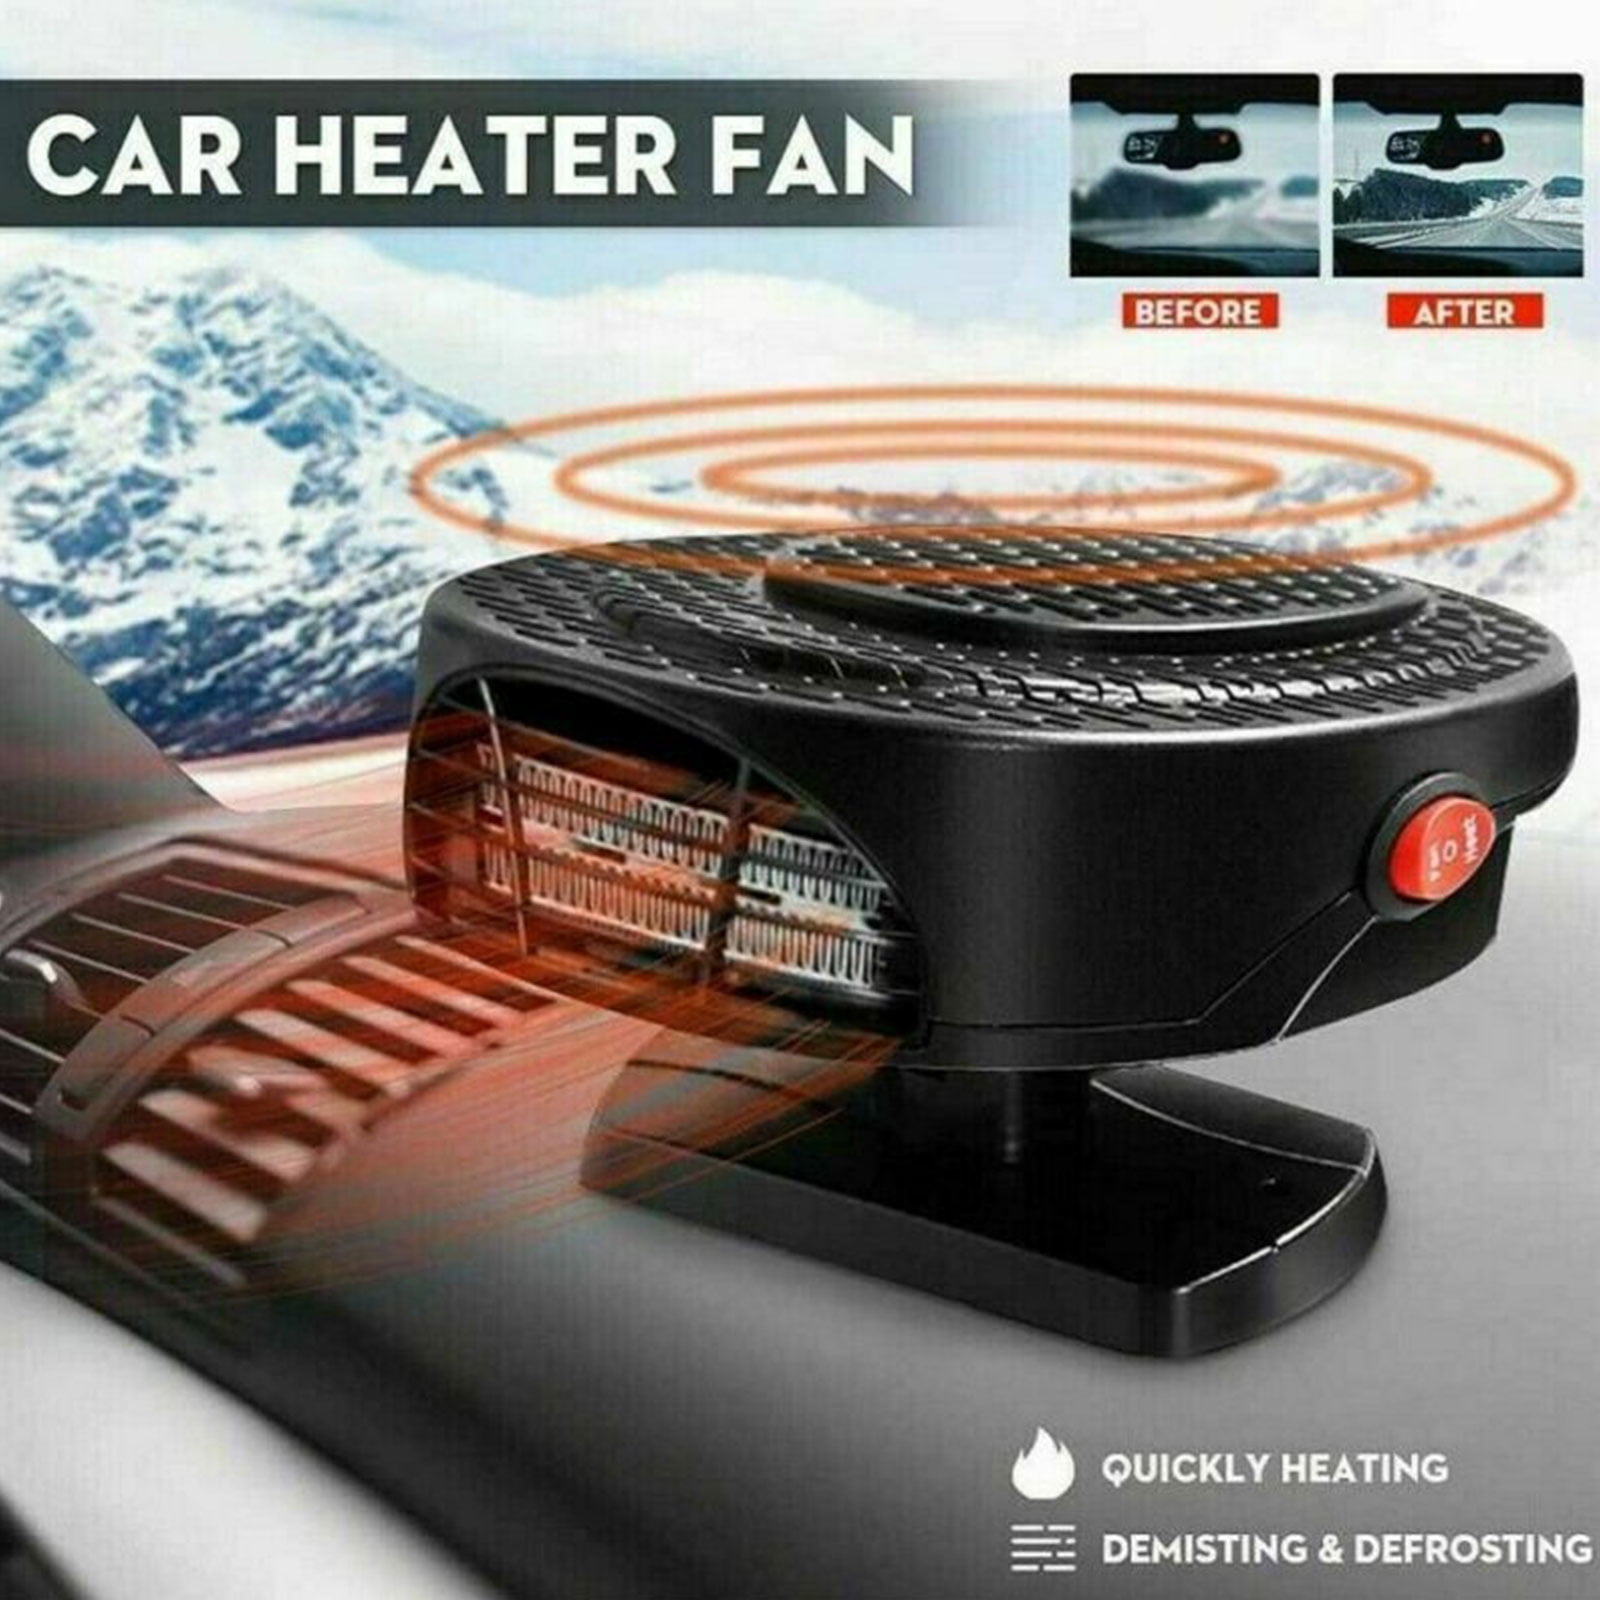 Black Portable Car Heater Fan Defroster Demister,30 Seconds Fast Heating Quickly Defrosts Defogger Car Vehicle Cooling Fan Auto Windscreen Heater 